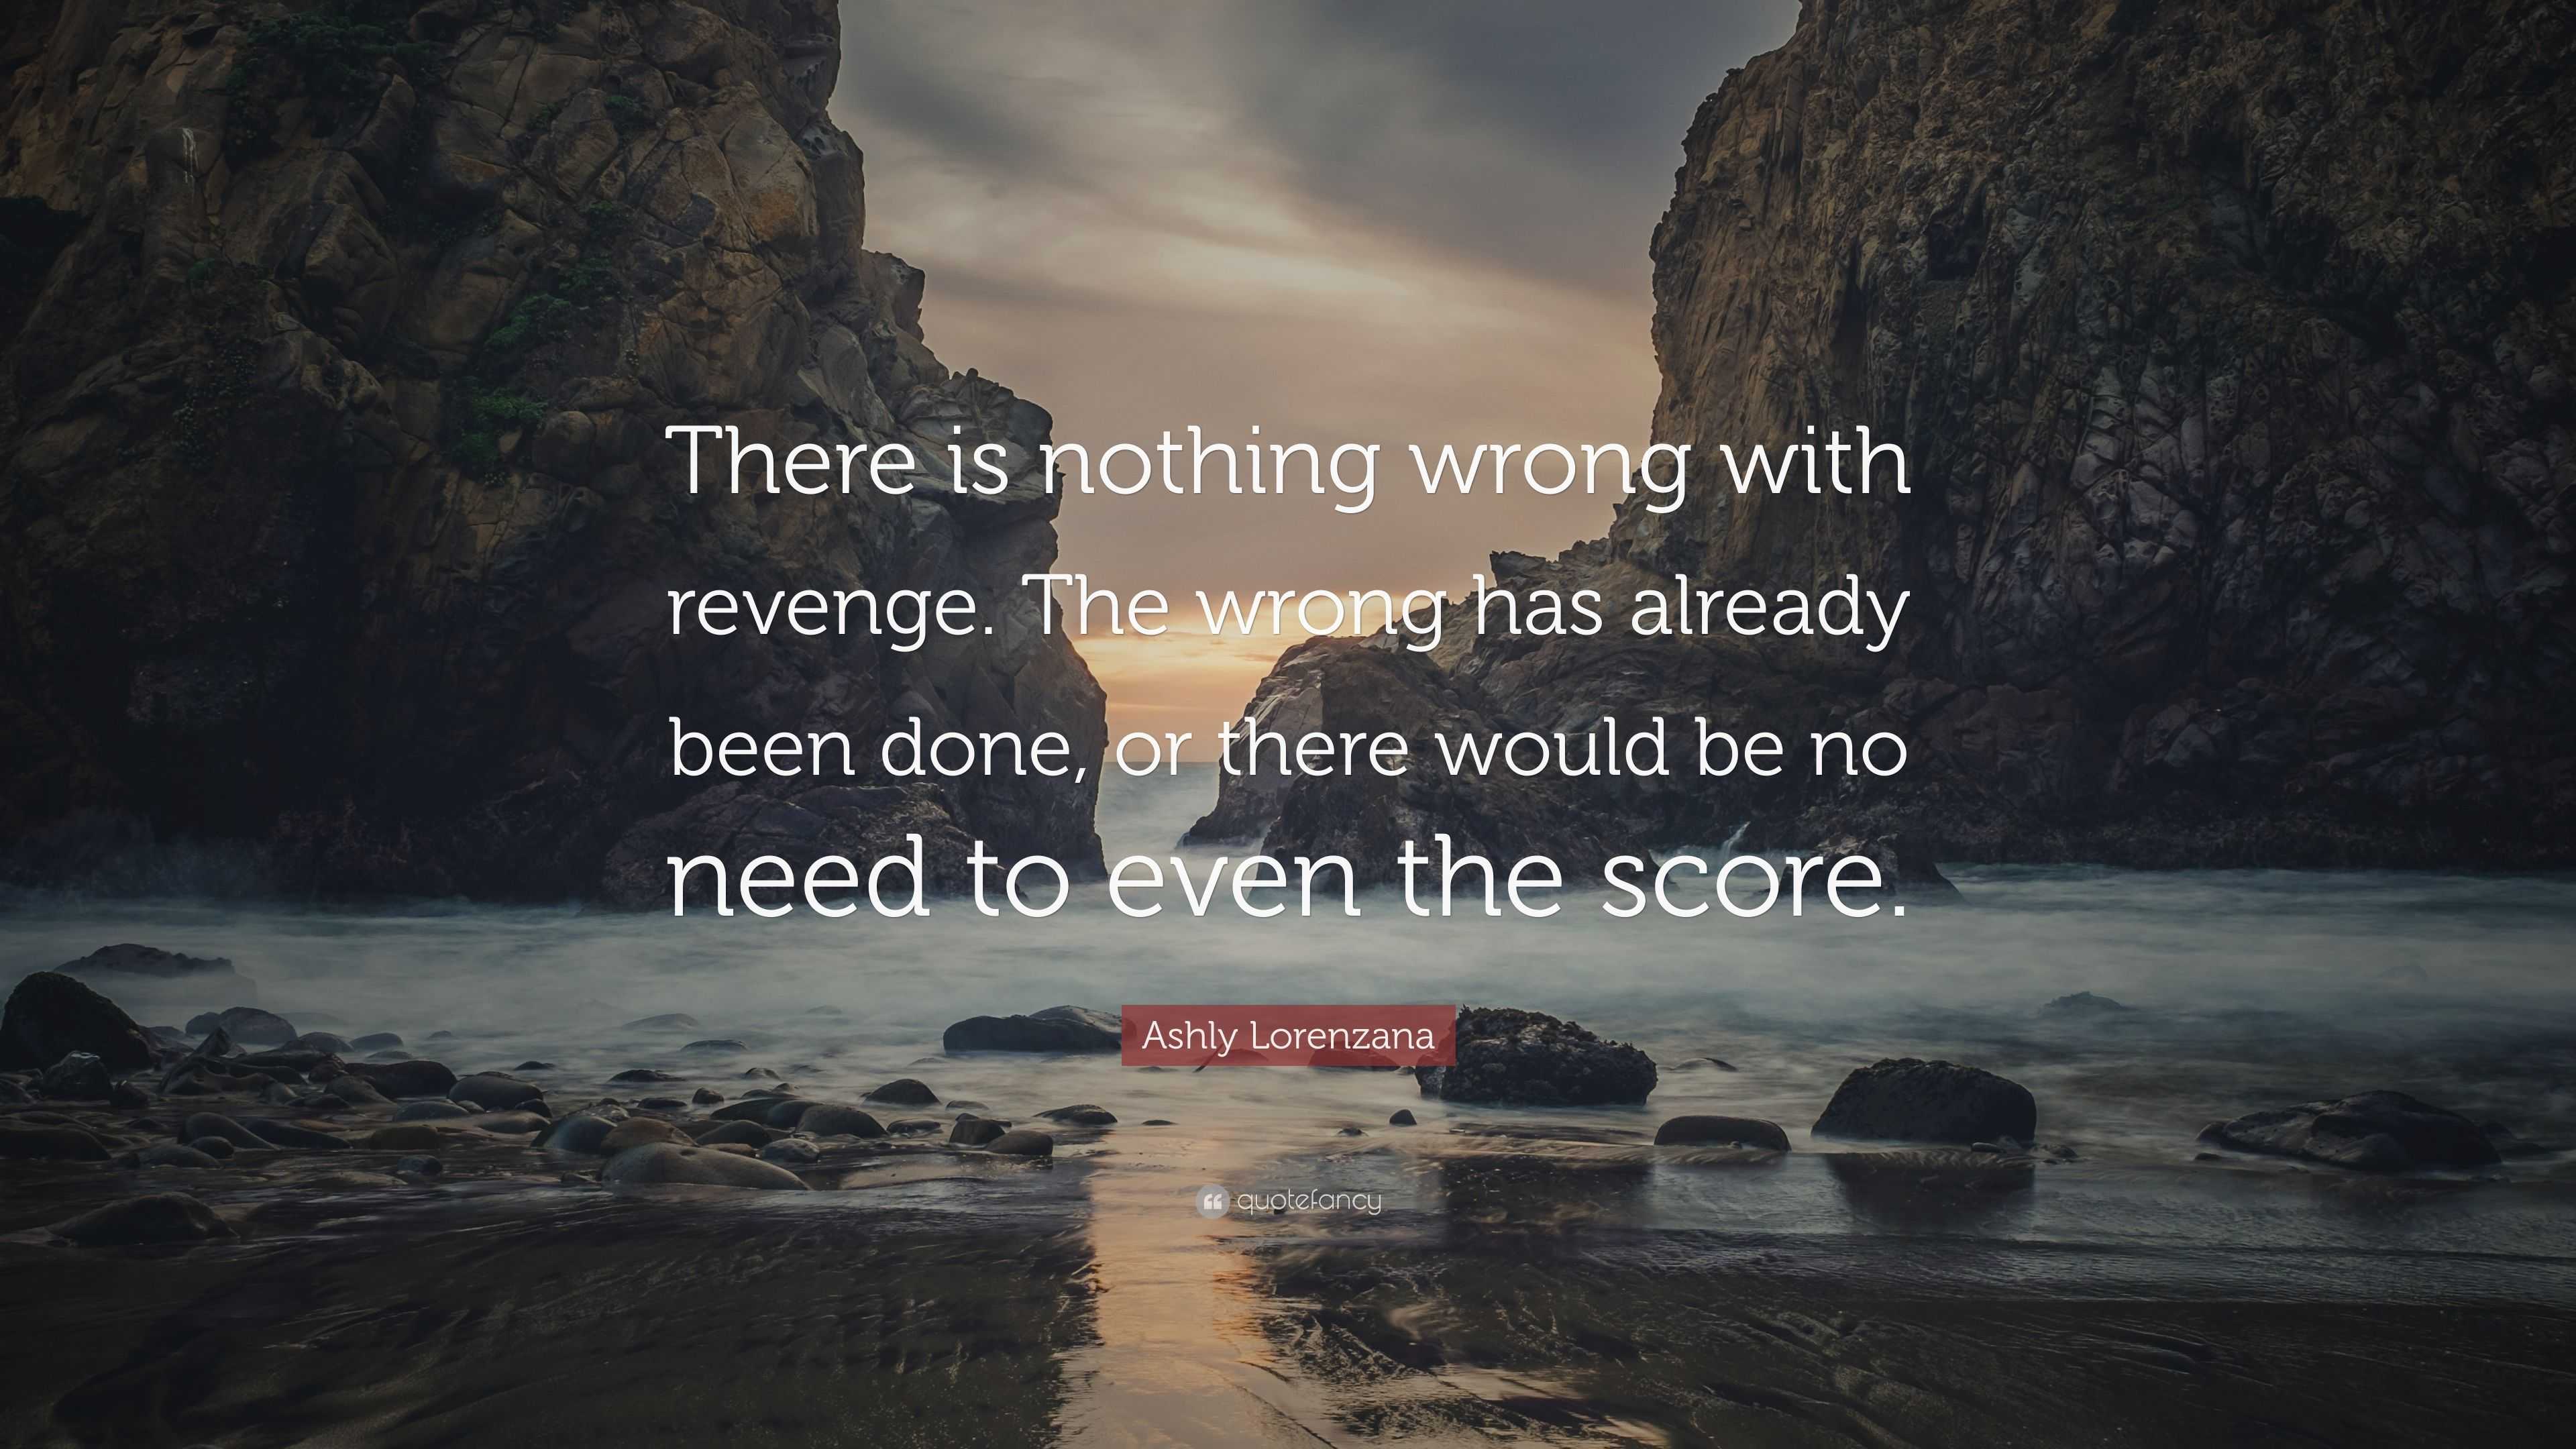 Ashly Lorenzana Quote: “There is nothing wrong with revenge. The wrong ...